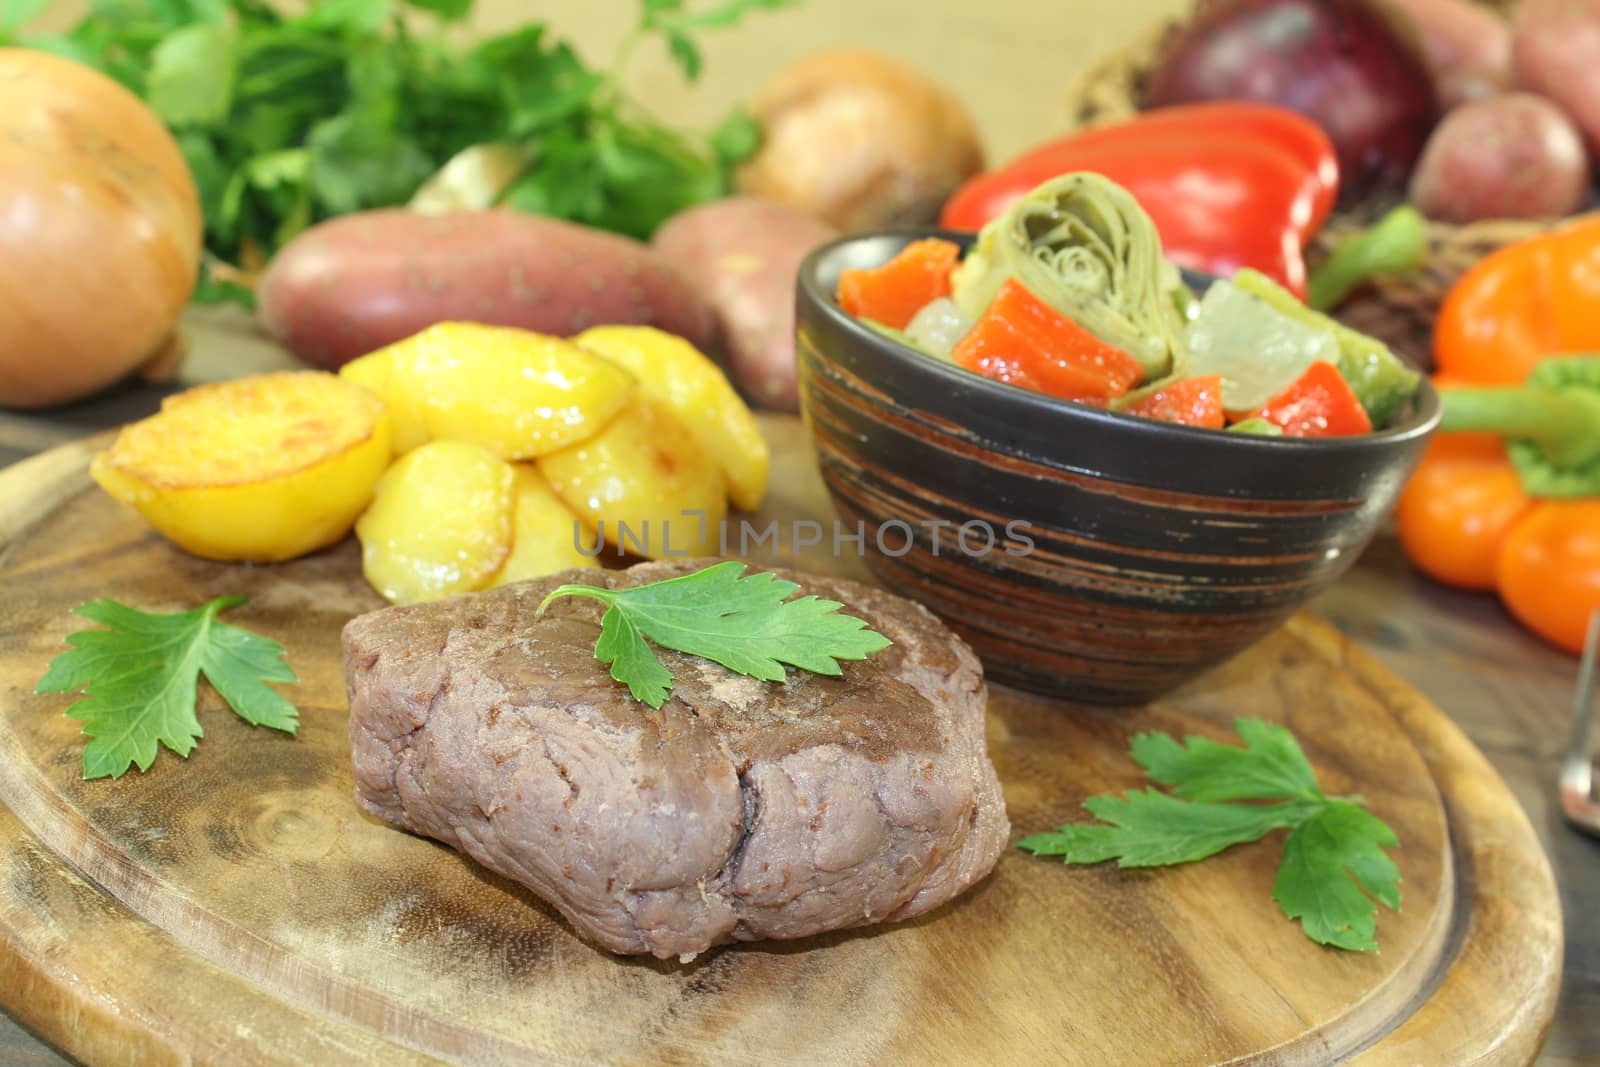 Ostrich steak with crispy baked potatoes and vegetables by discovery